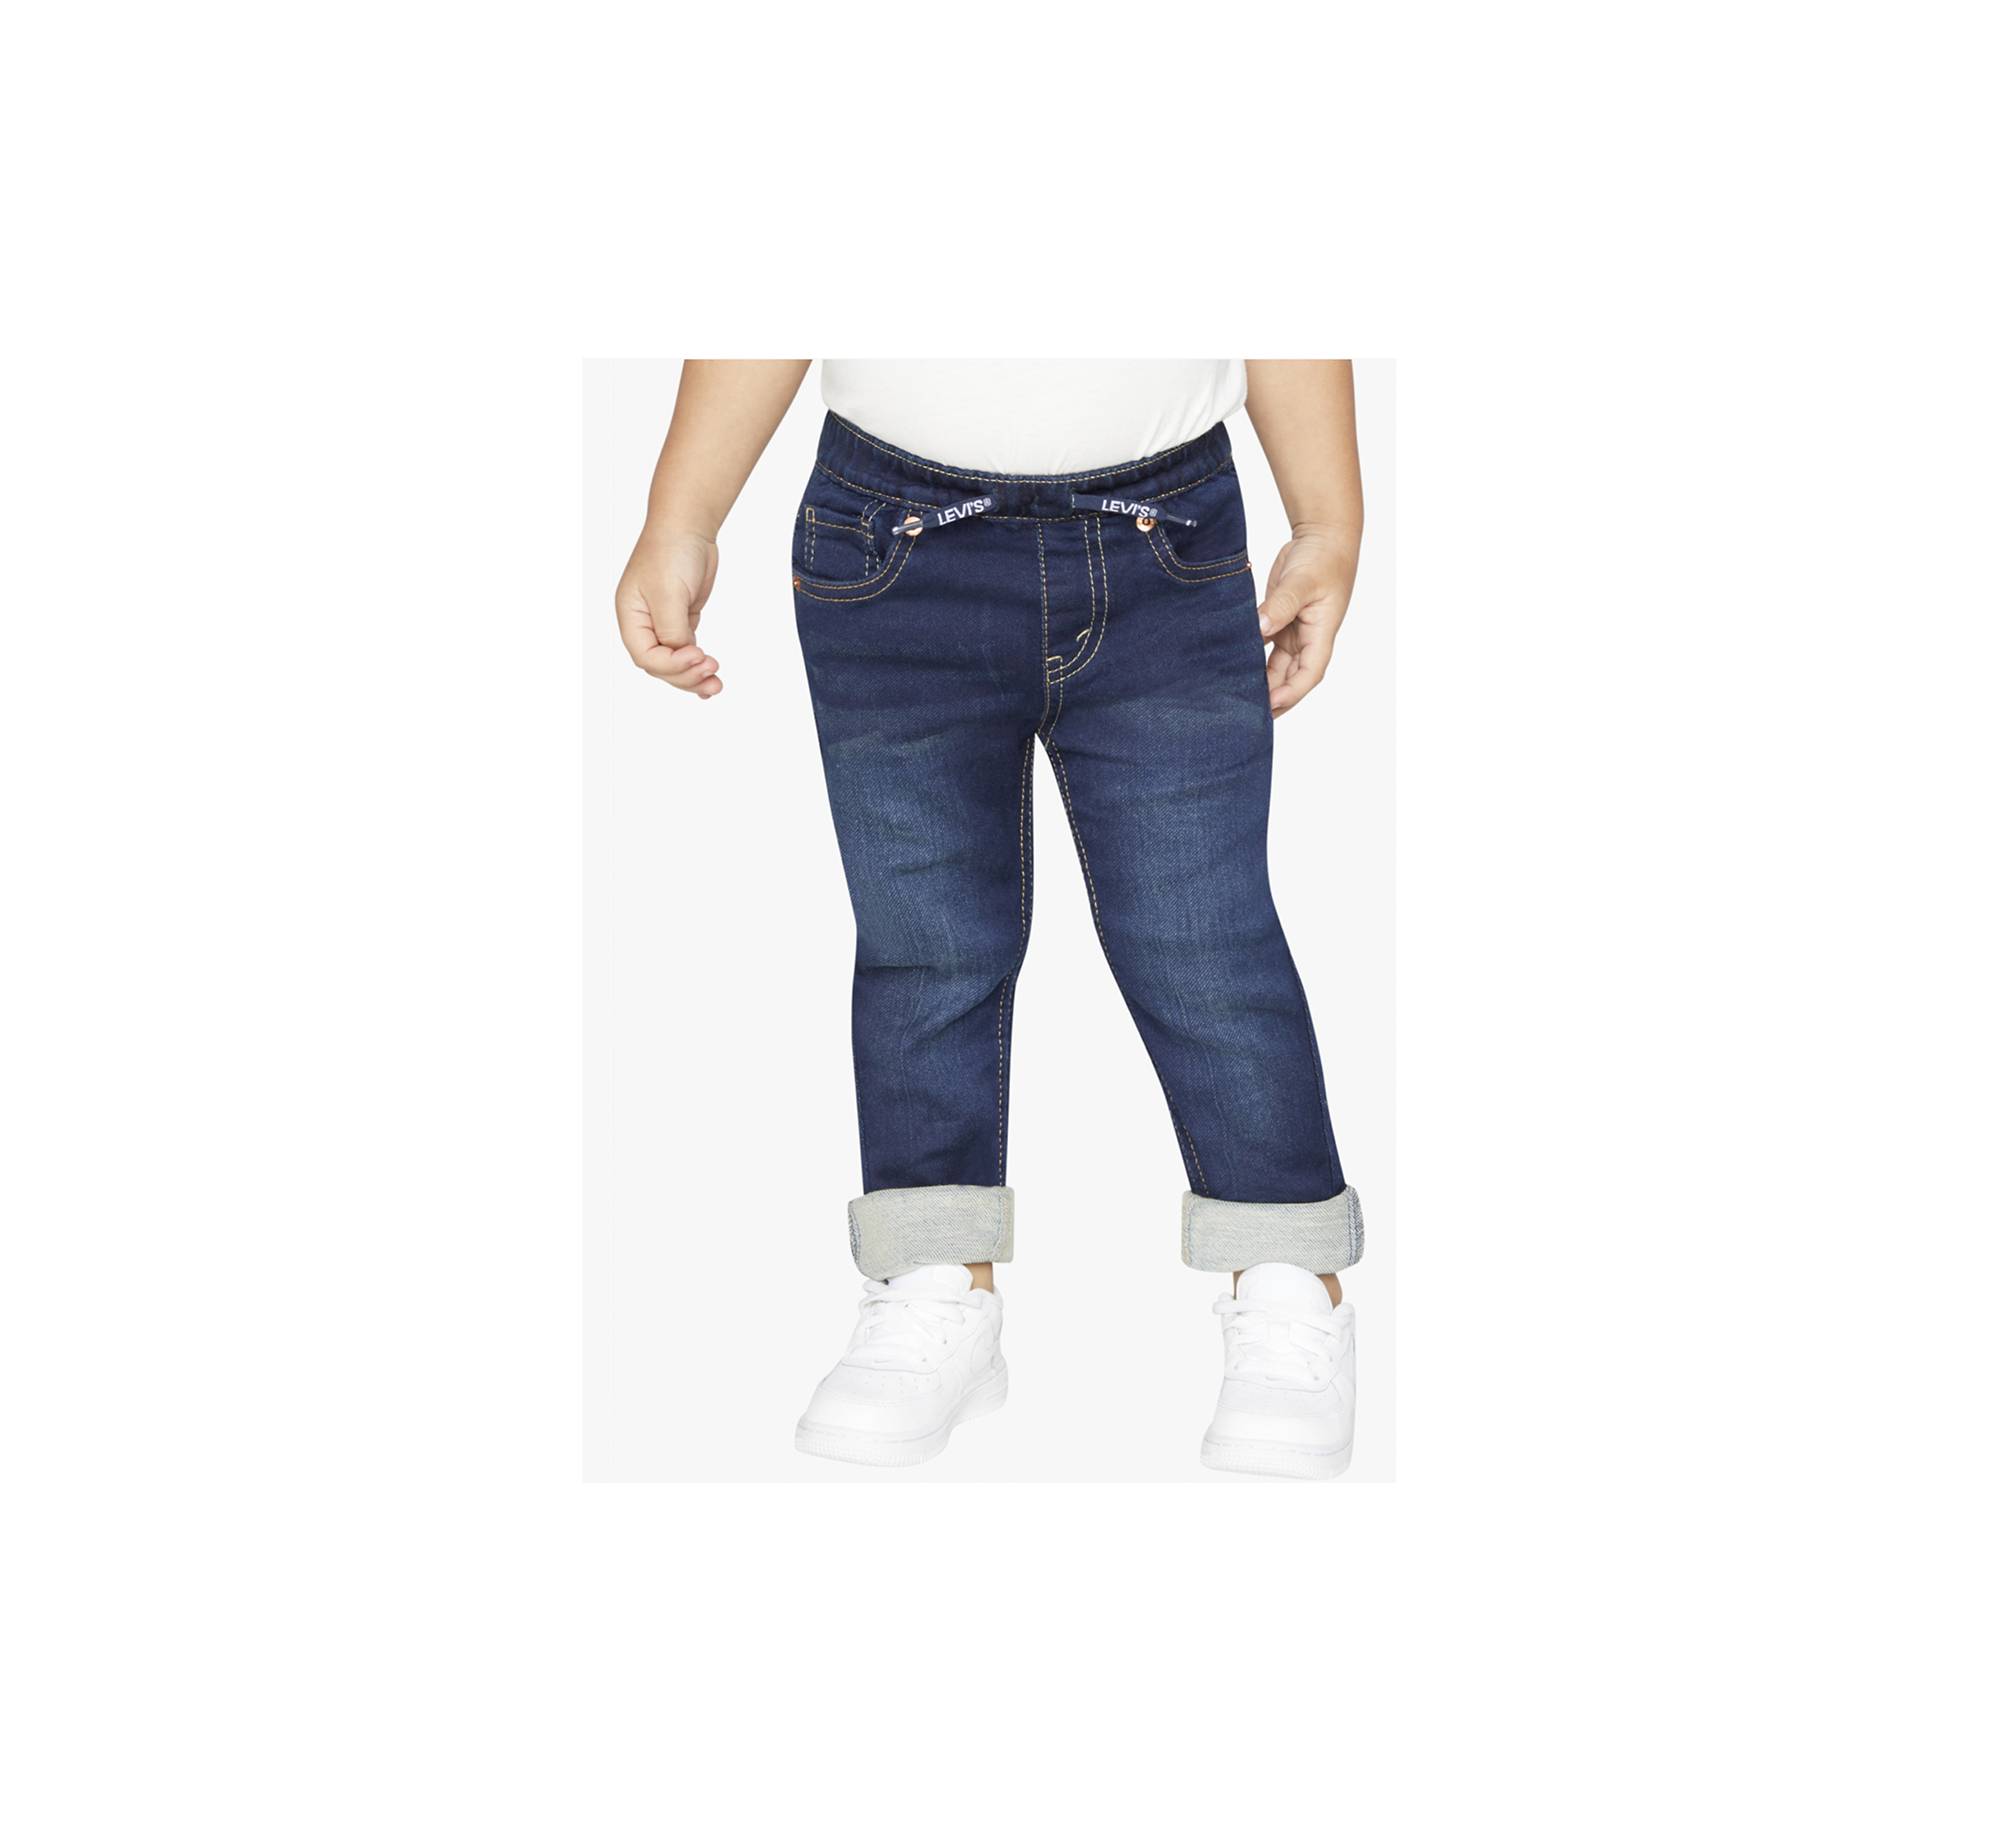 Pull On Skinny Fit Pants Toddler Boys 2T-4T 1